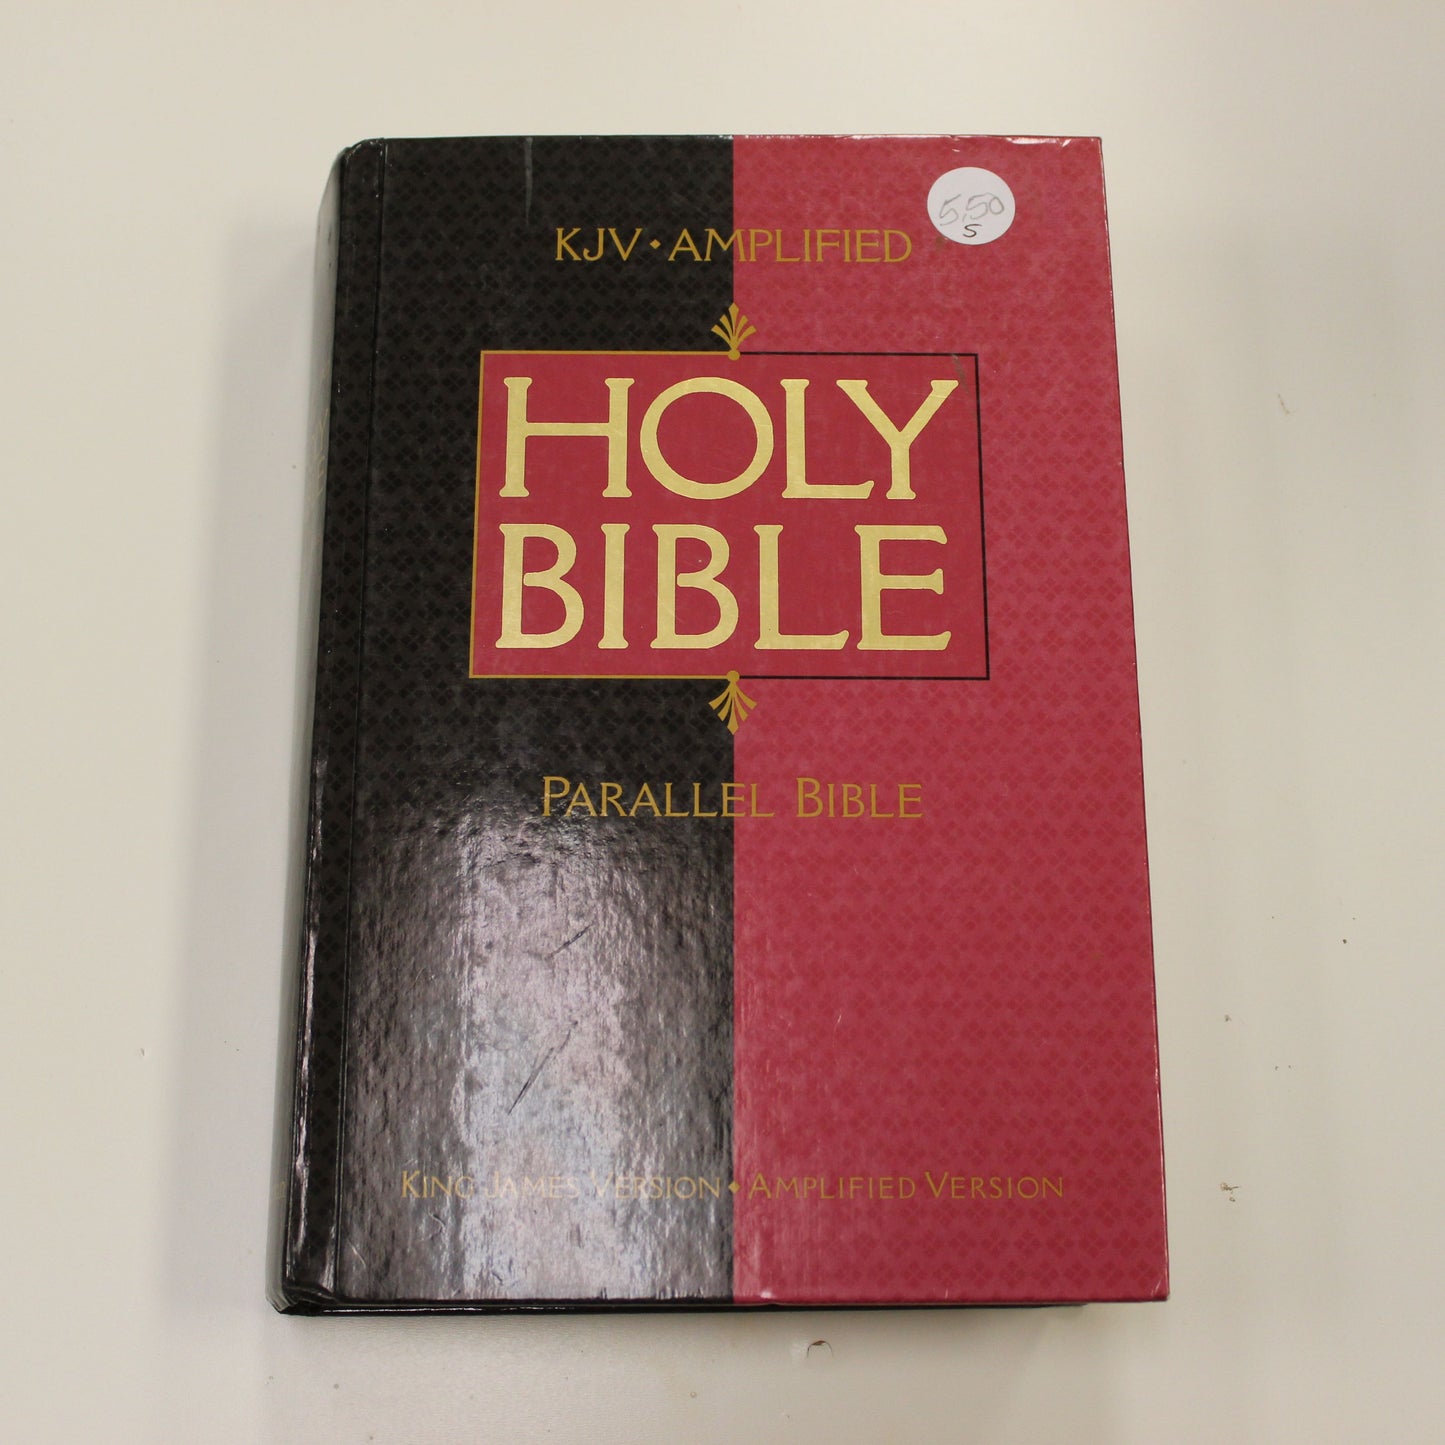 KJV AMPLIFIED HOLY BIBLE PARALLEL BIBLE